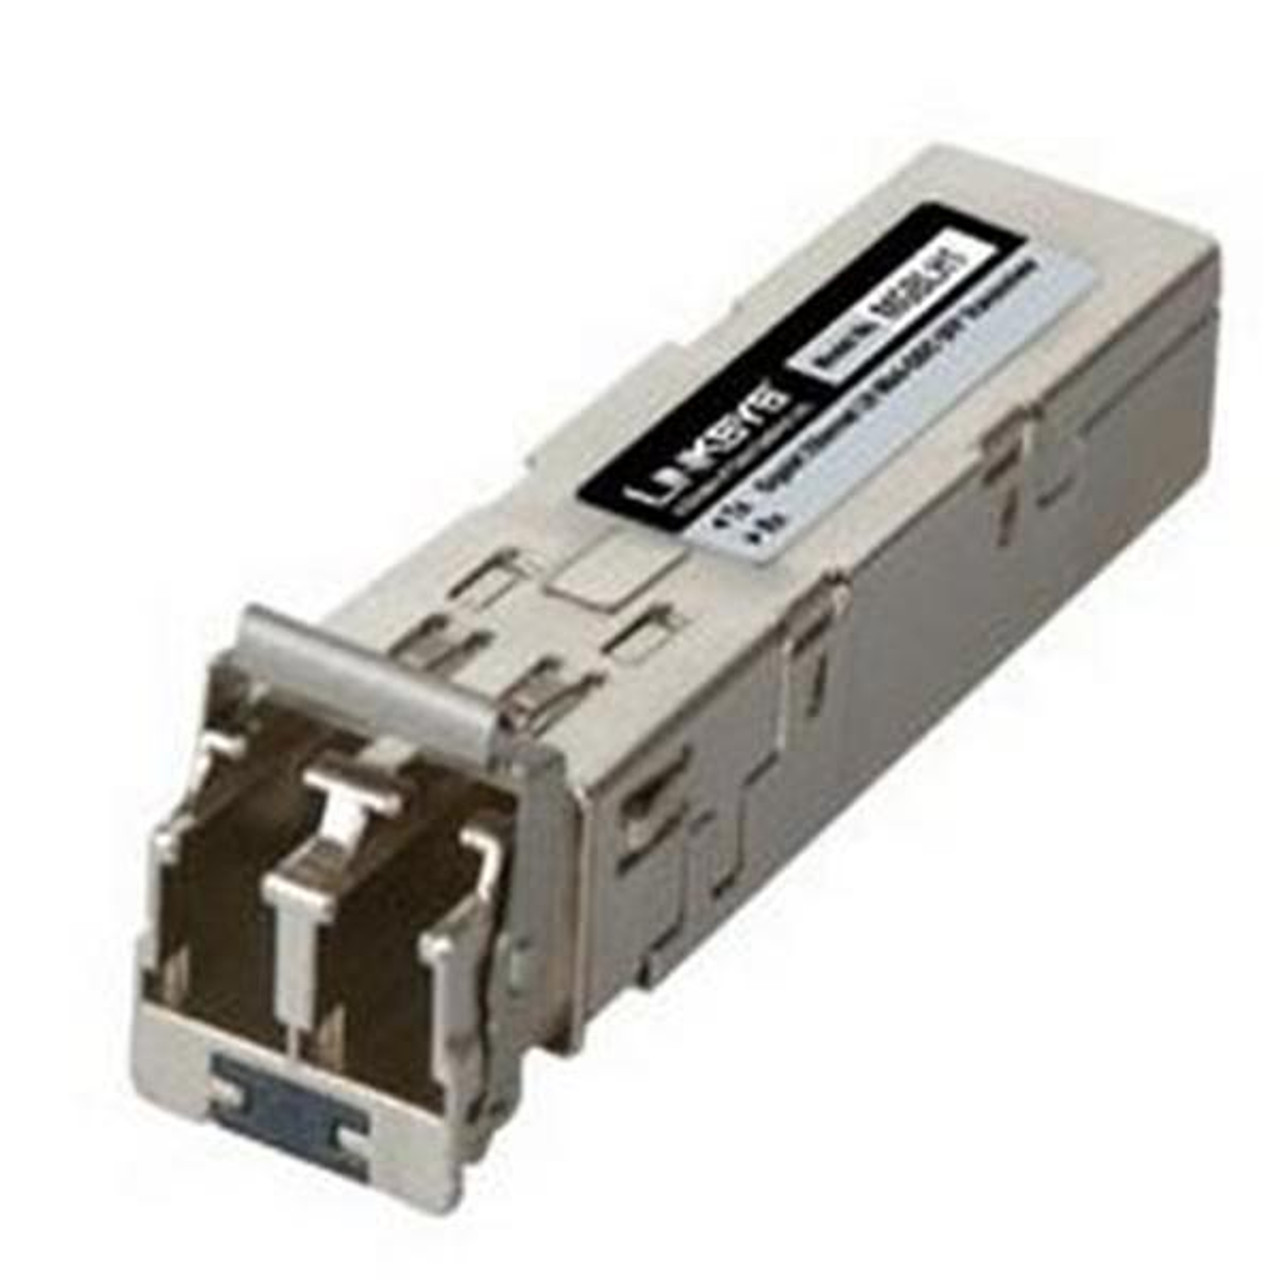 LINKSYSMGBLH1 Linksys 1Gbps 1000Base-LH 10km 1310nm Duplex LC Connector SFP (Mini-GBIC) Transceiver Module